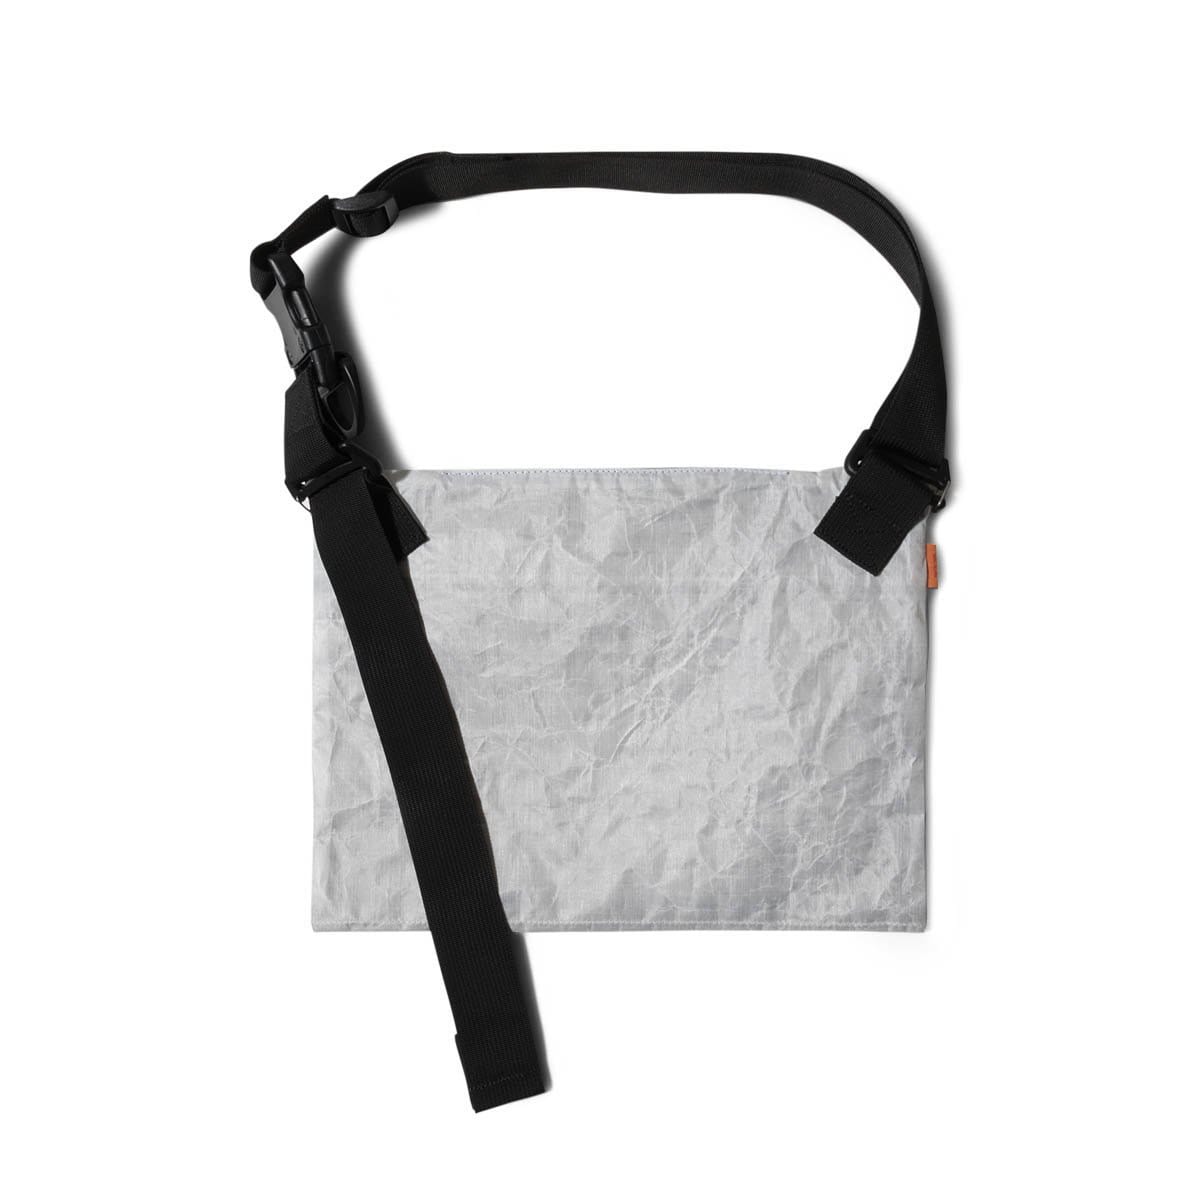 Musette Sling Bag - Simple and Durable Black Nylon